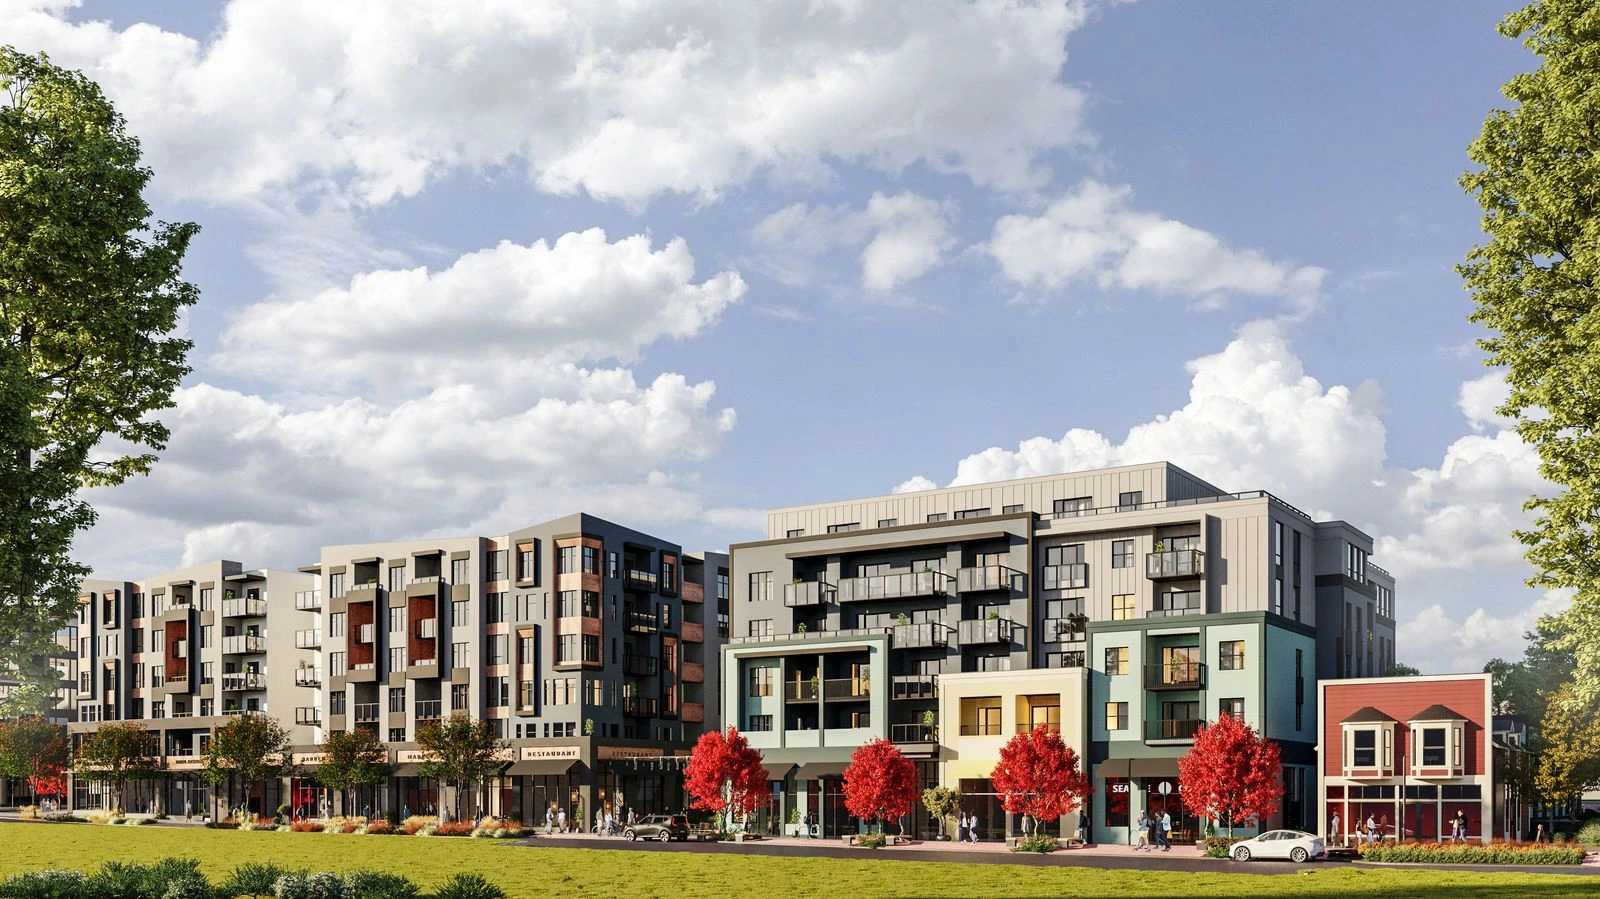 Mary Anne's Place is a Port Moody mixed-use development with condos, apartments, and retail.